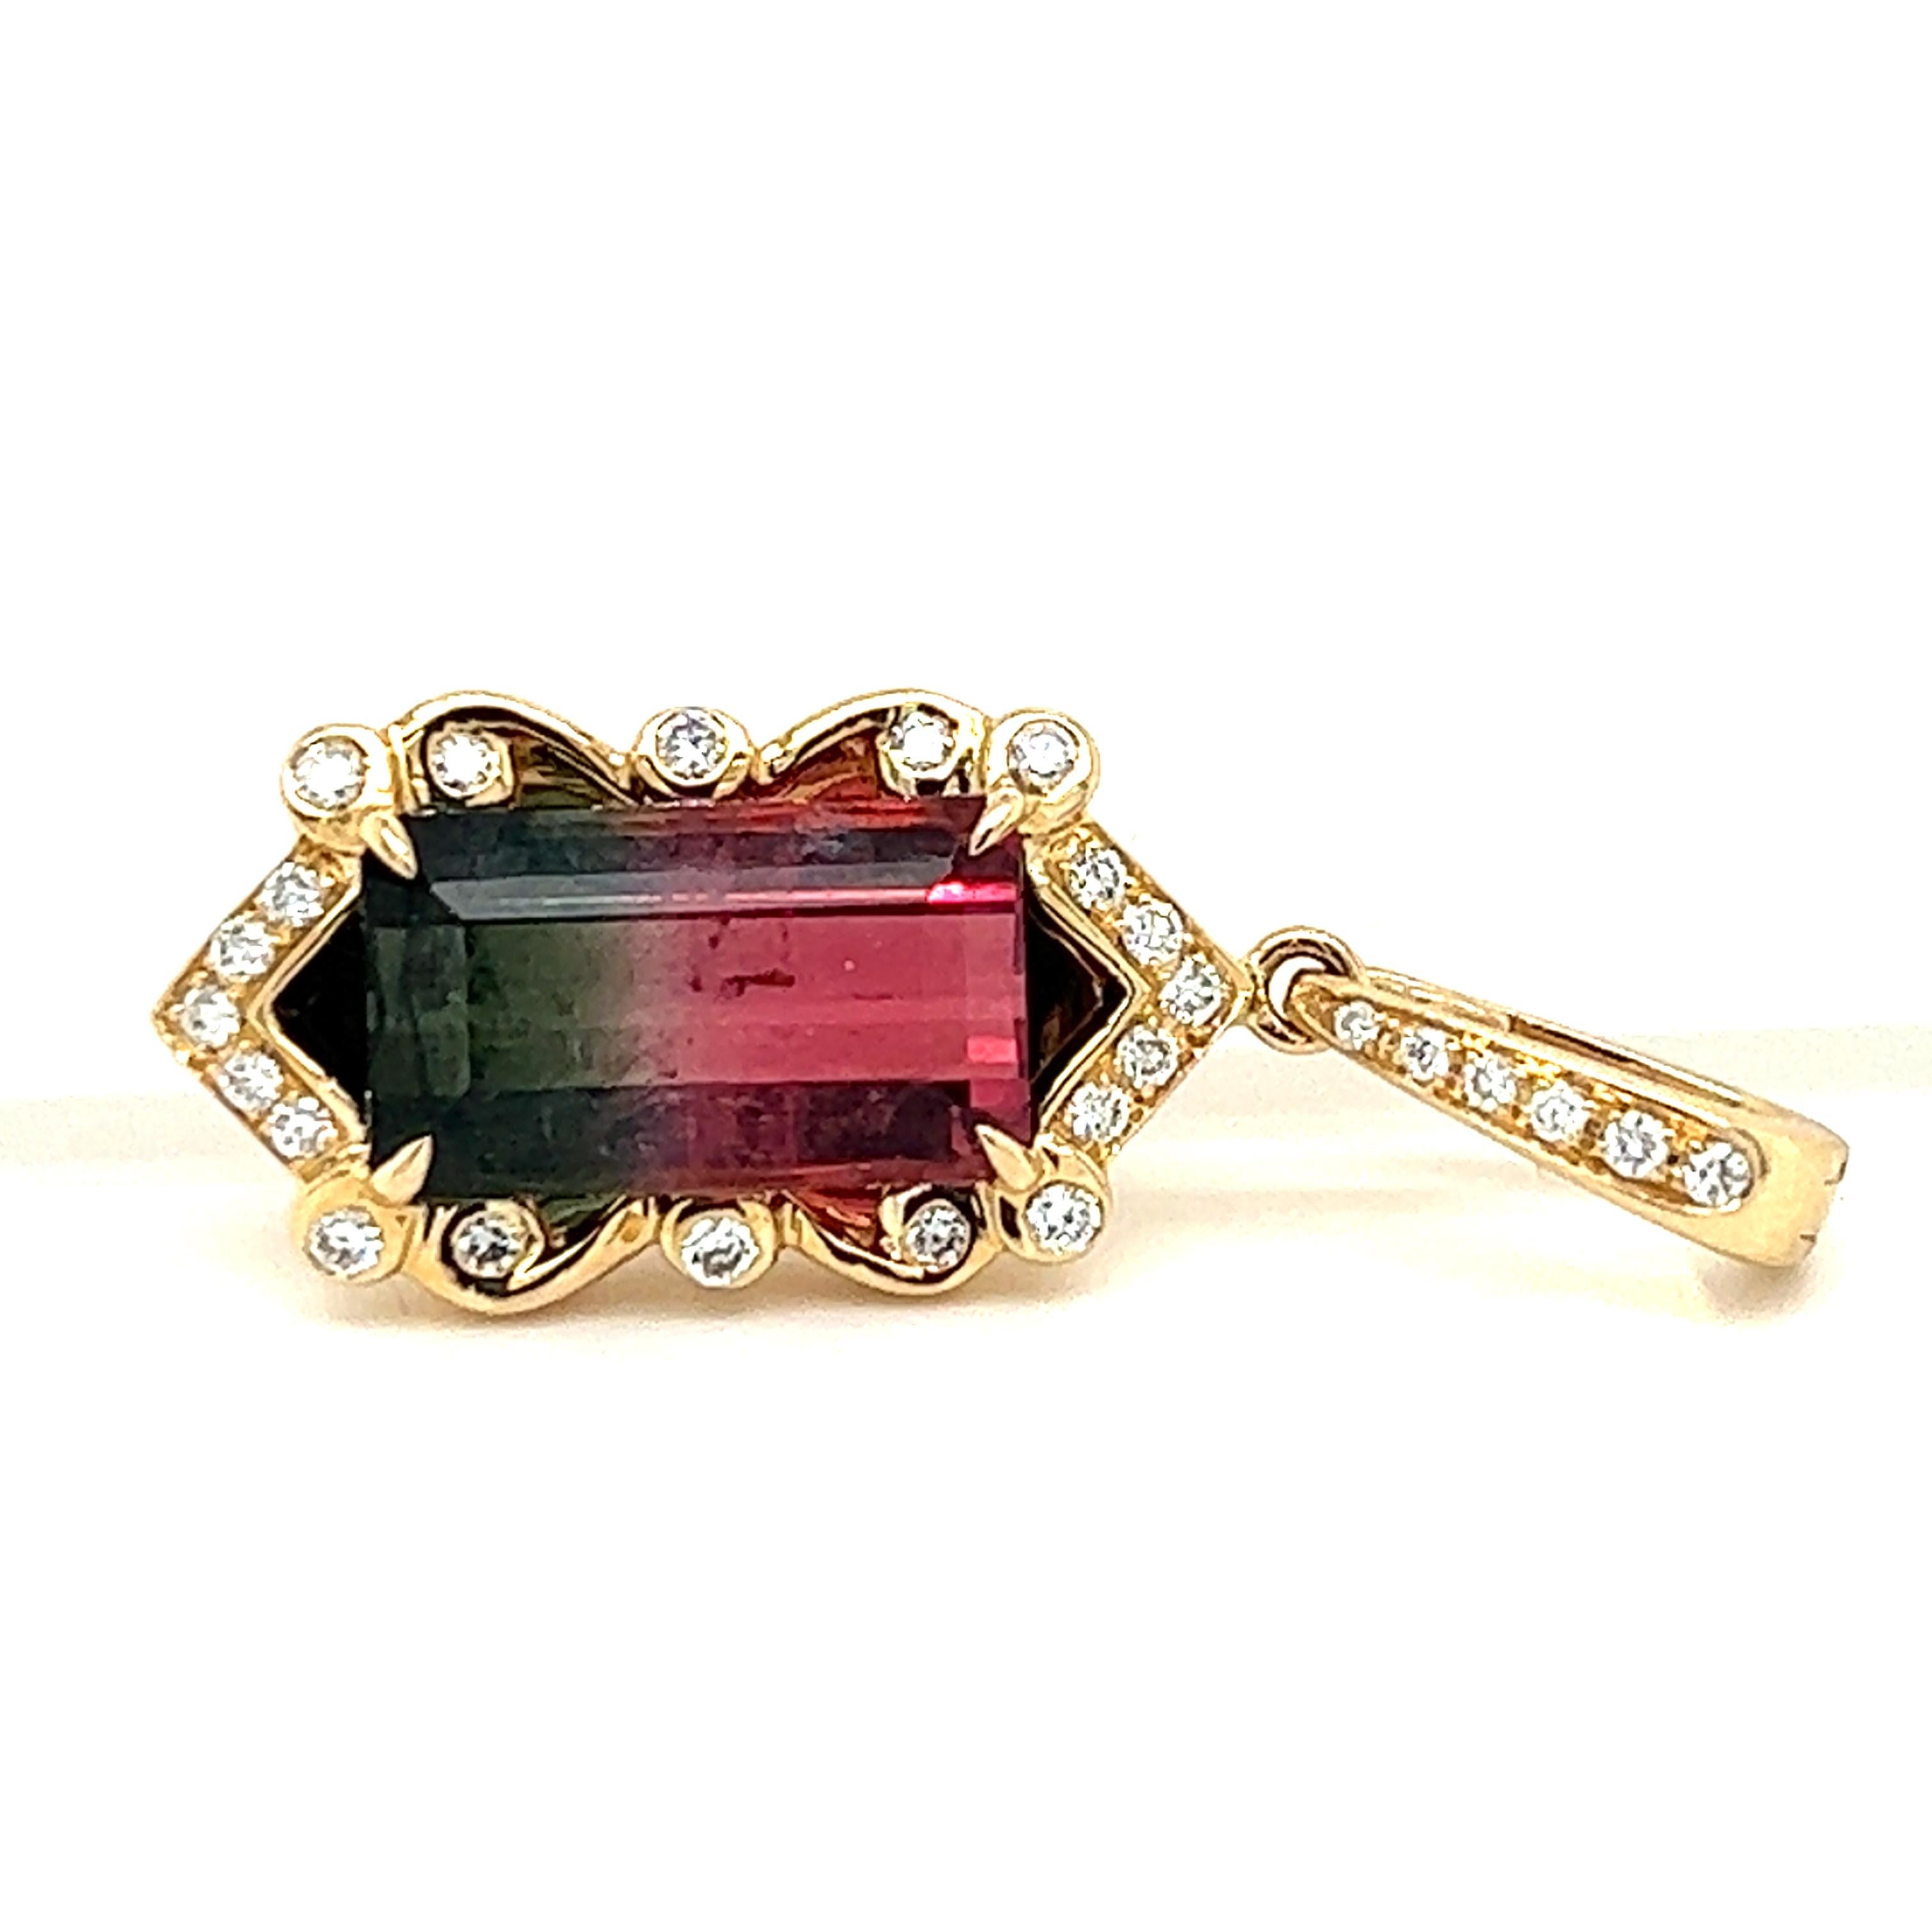 One 14-karat yellow gold pendant set with one 4.28-carat emerald cut watermelon tourmaline and 0.27-carat total weight of round brilliant diamonds with matching H/I color and SI clarity. The pendant is stamped 